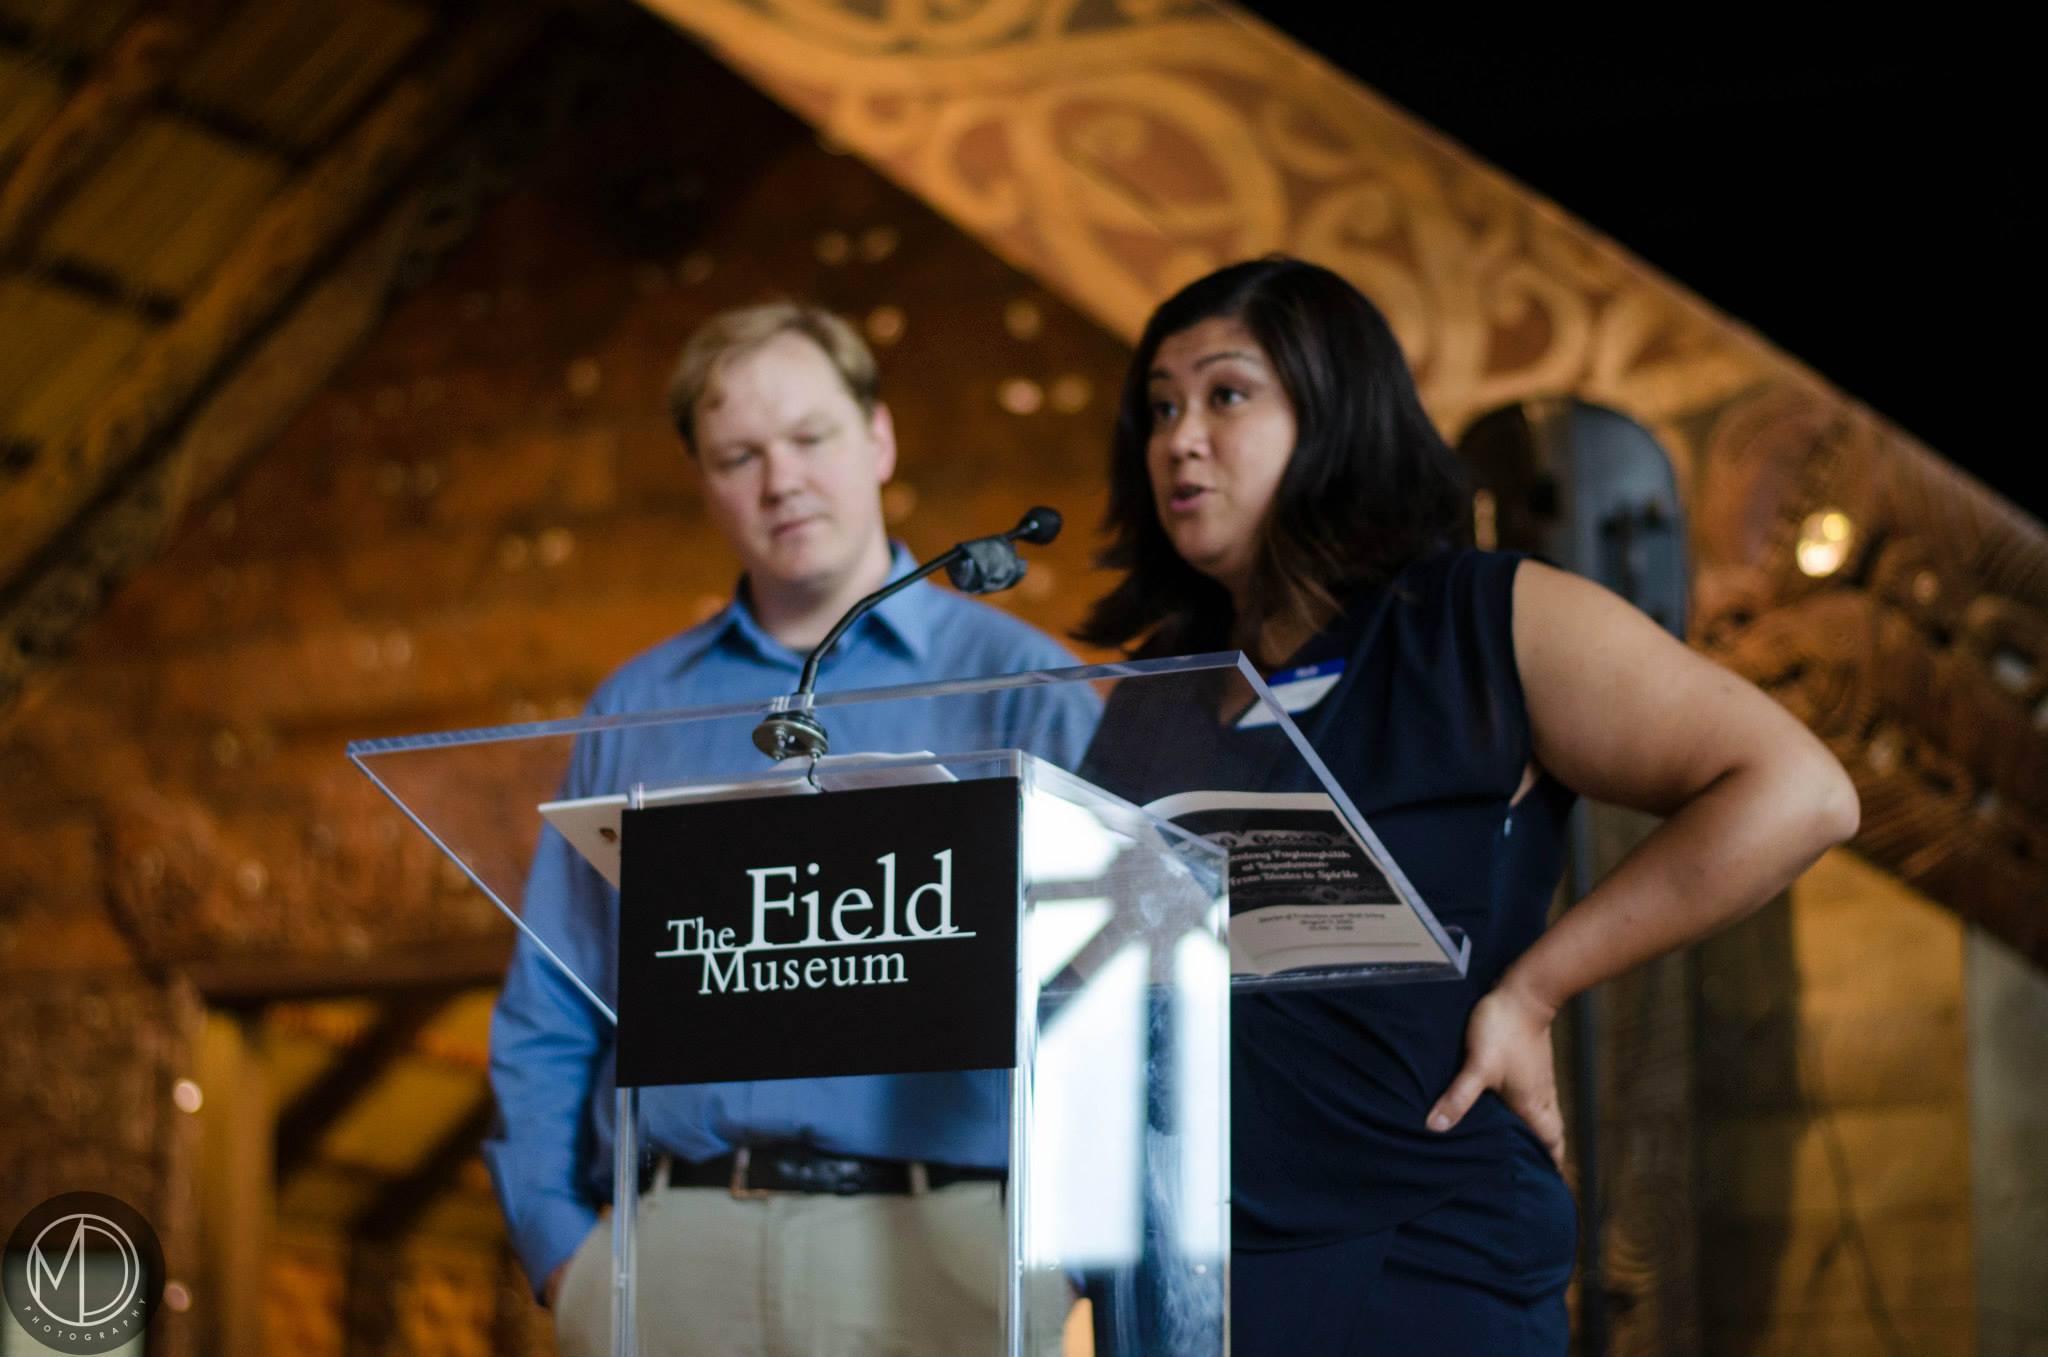 Guest speakers Brendan Mattson and Mia Lahoz address the attendees. (c) Field Museum of Natural History - CC BY-NC 4.0